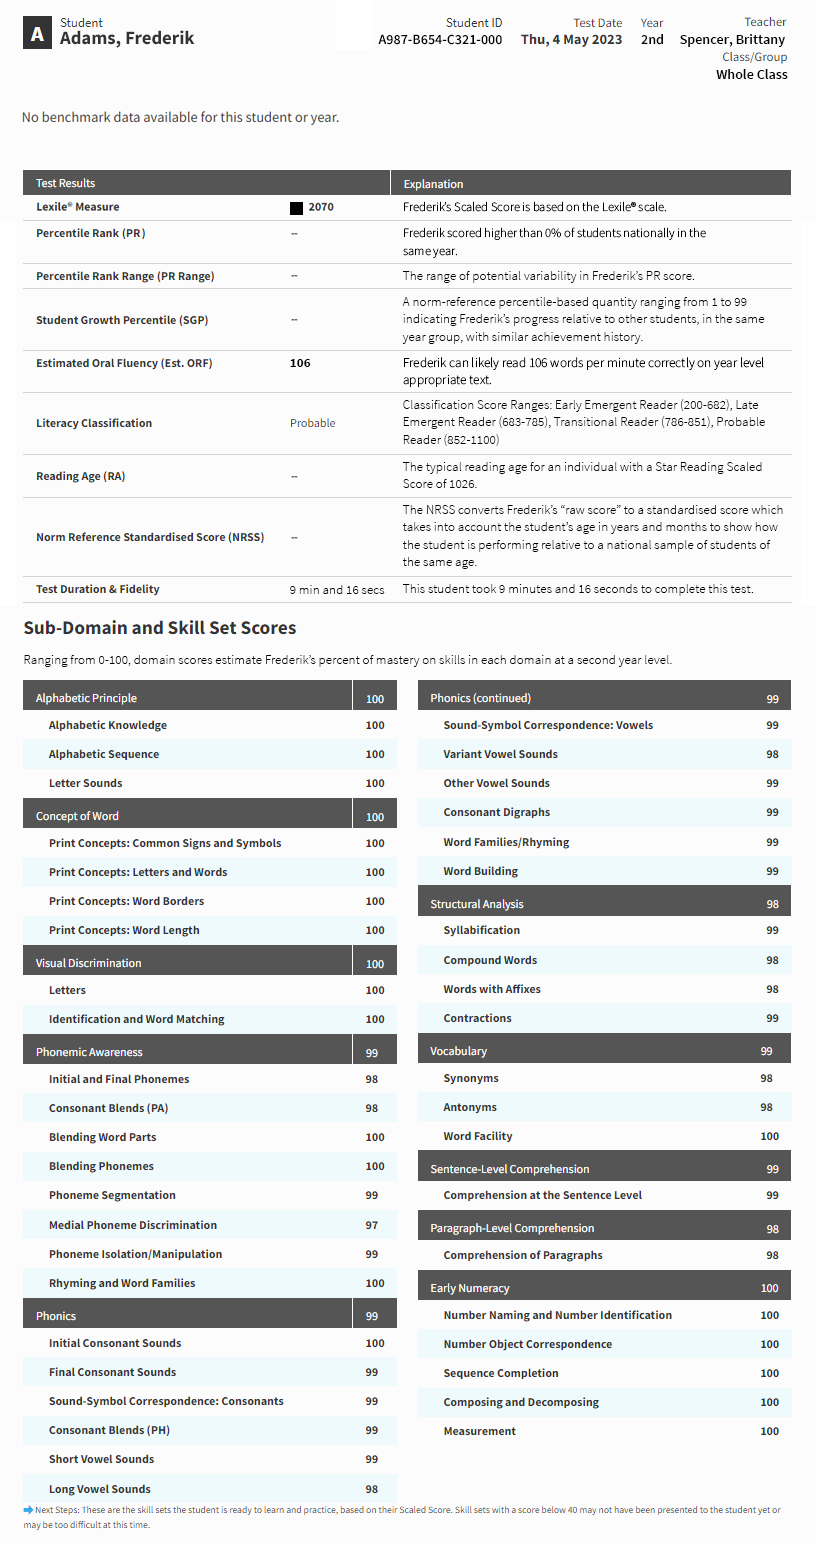 An example Star Early Literacy report. The scores from the student's most recent test are shown, along with Estimated Oral Reading Fluency, Literacy Classification, and the test's duration. At the bottom are the sub-domain and skill set scores.